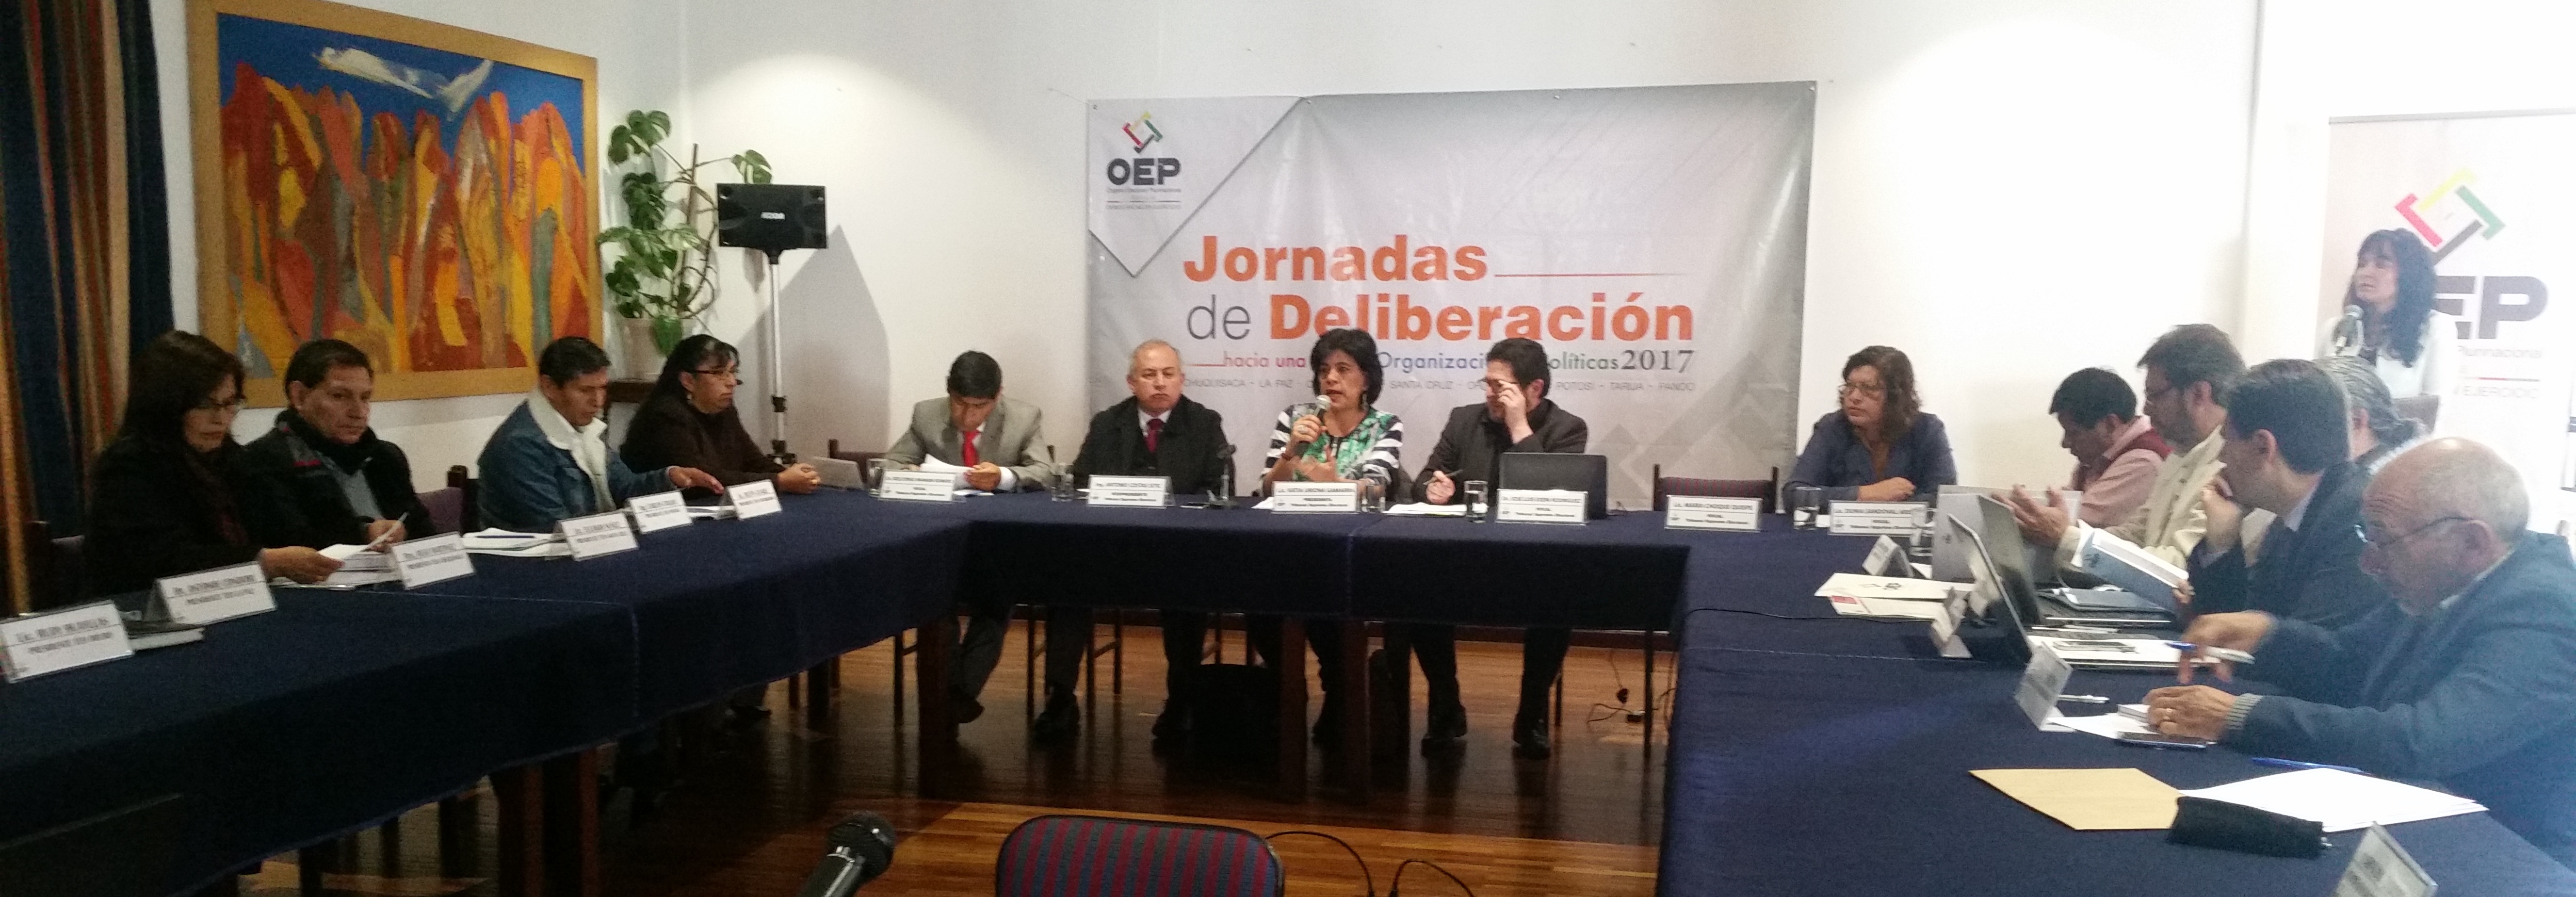 International IDEA’s national office in Bolivia supports the process of plural and participatory dialogue for the reform of the Political Organization’s Law of the Plurinational State of Bolivia. Photo credit: International IDEA